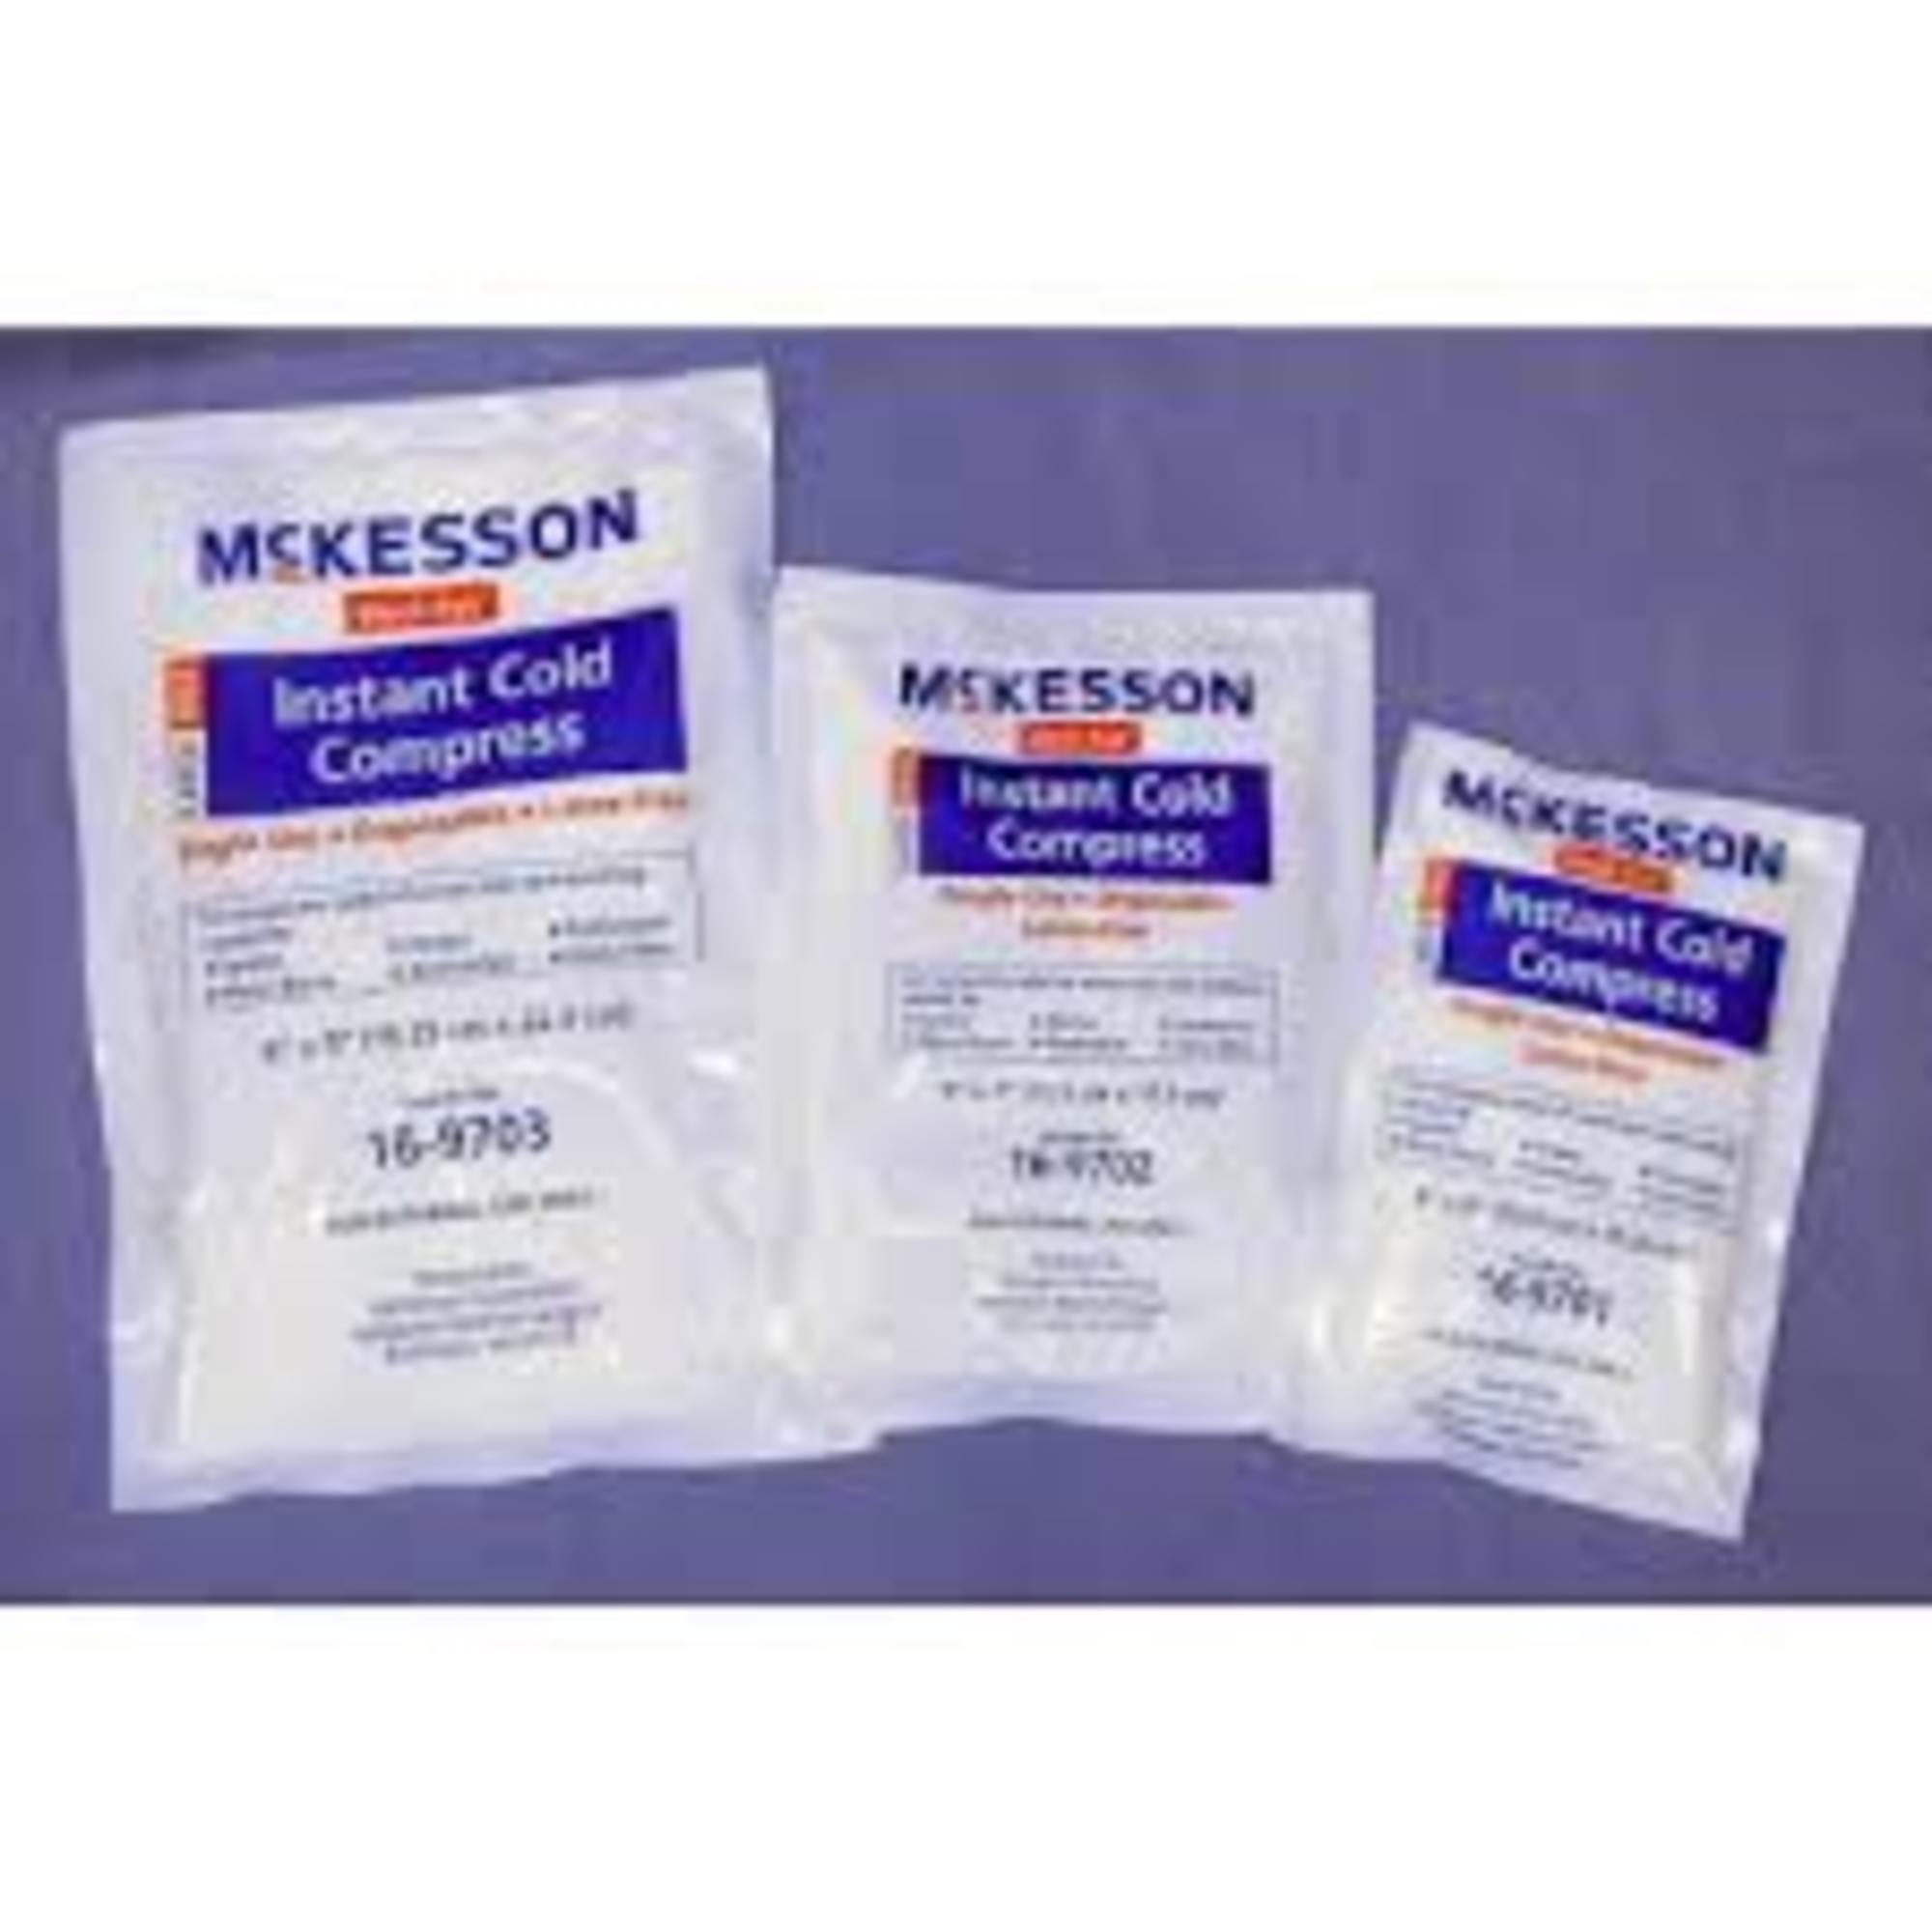 McKesson Cold Compress - Instant Ice Pack for Minor Injuries, 6 in x